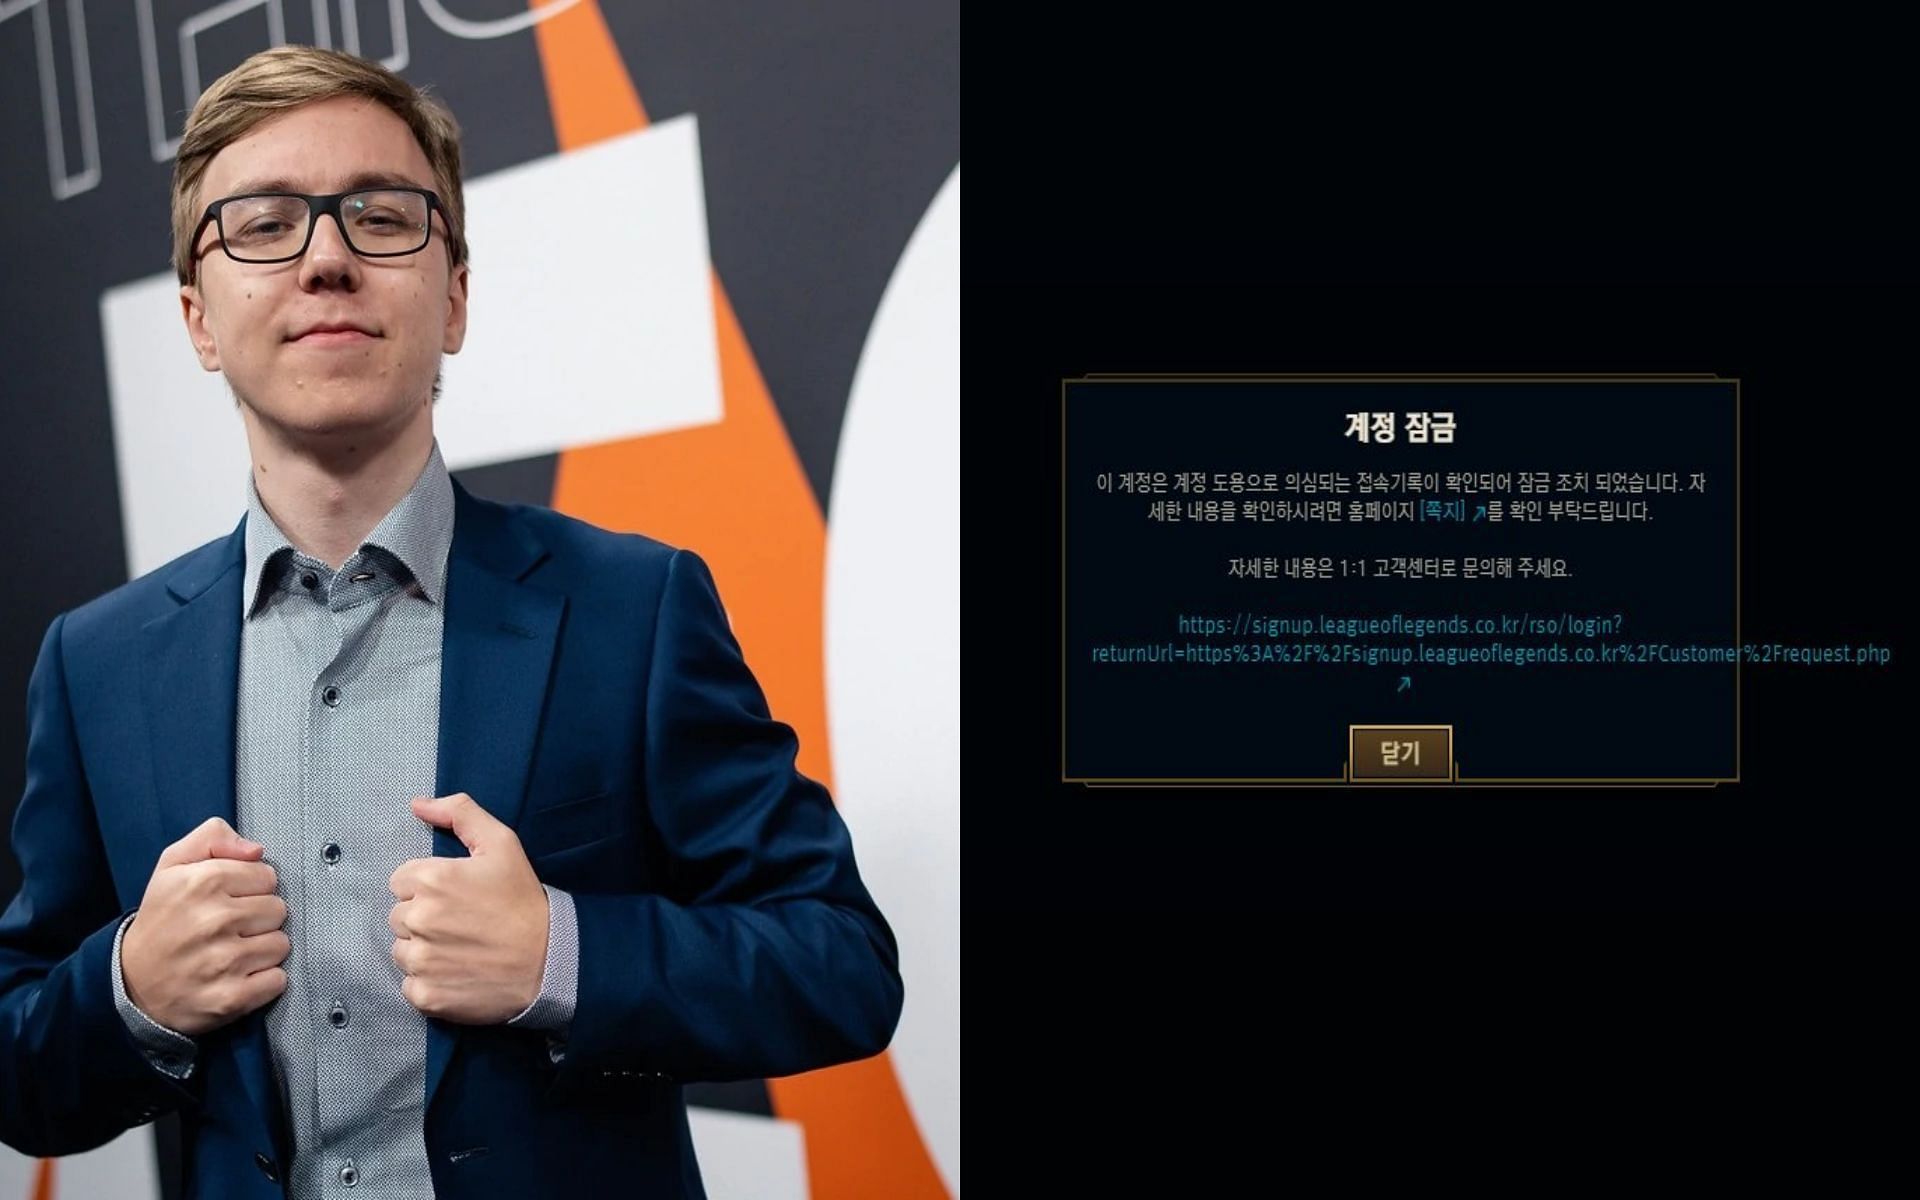 Thebausffs recently got banned from the South Korean League of Legends server (Image via Sportskeeda)